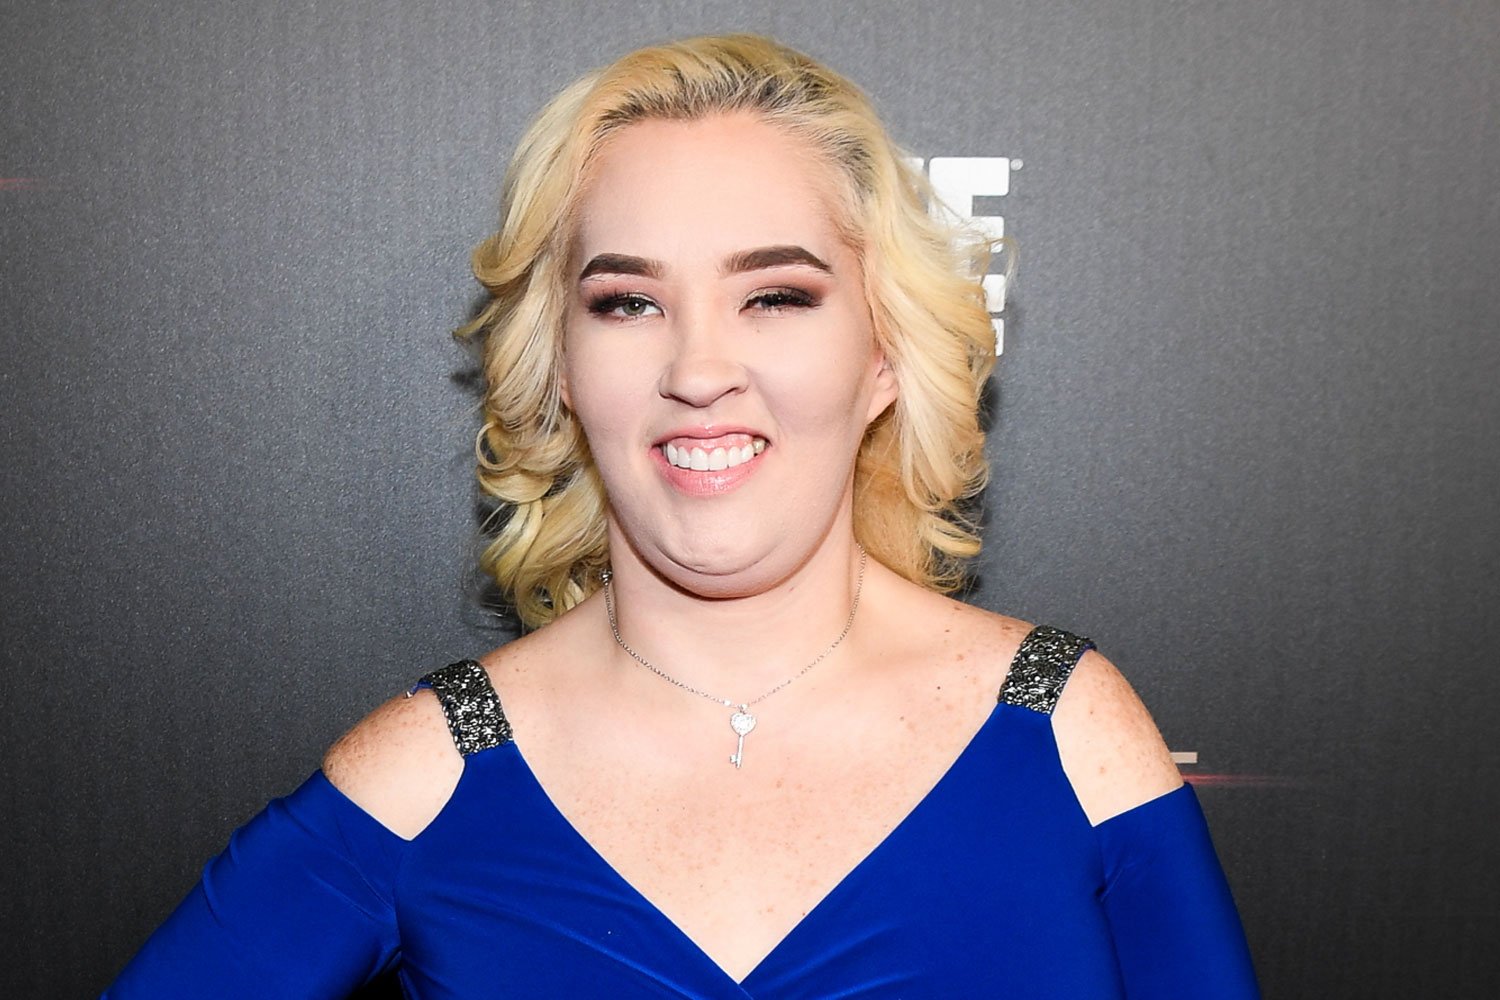 Mama June Shannon shows off 136 kgs weight loss on the Red Carpet.